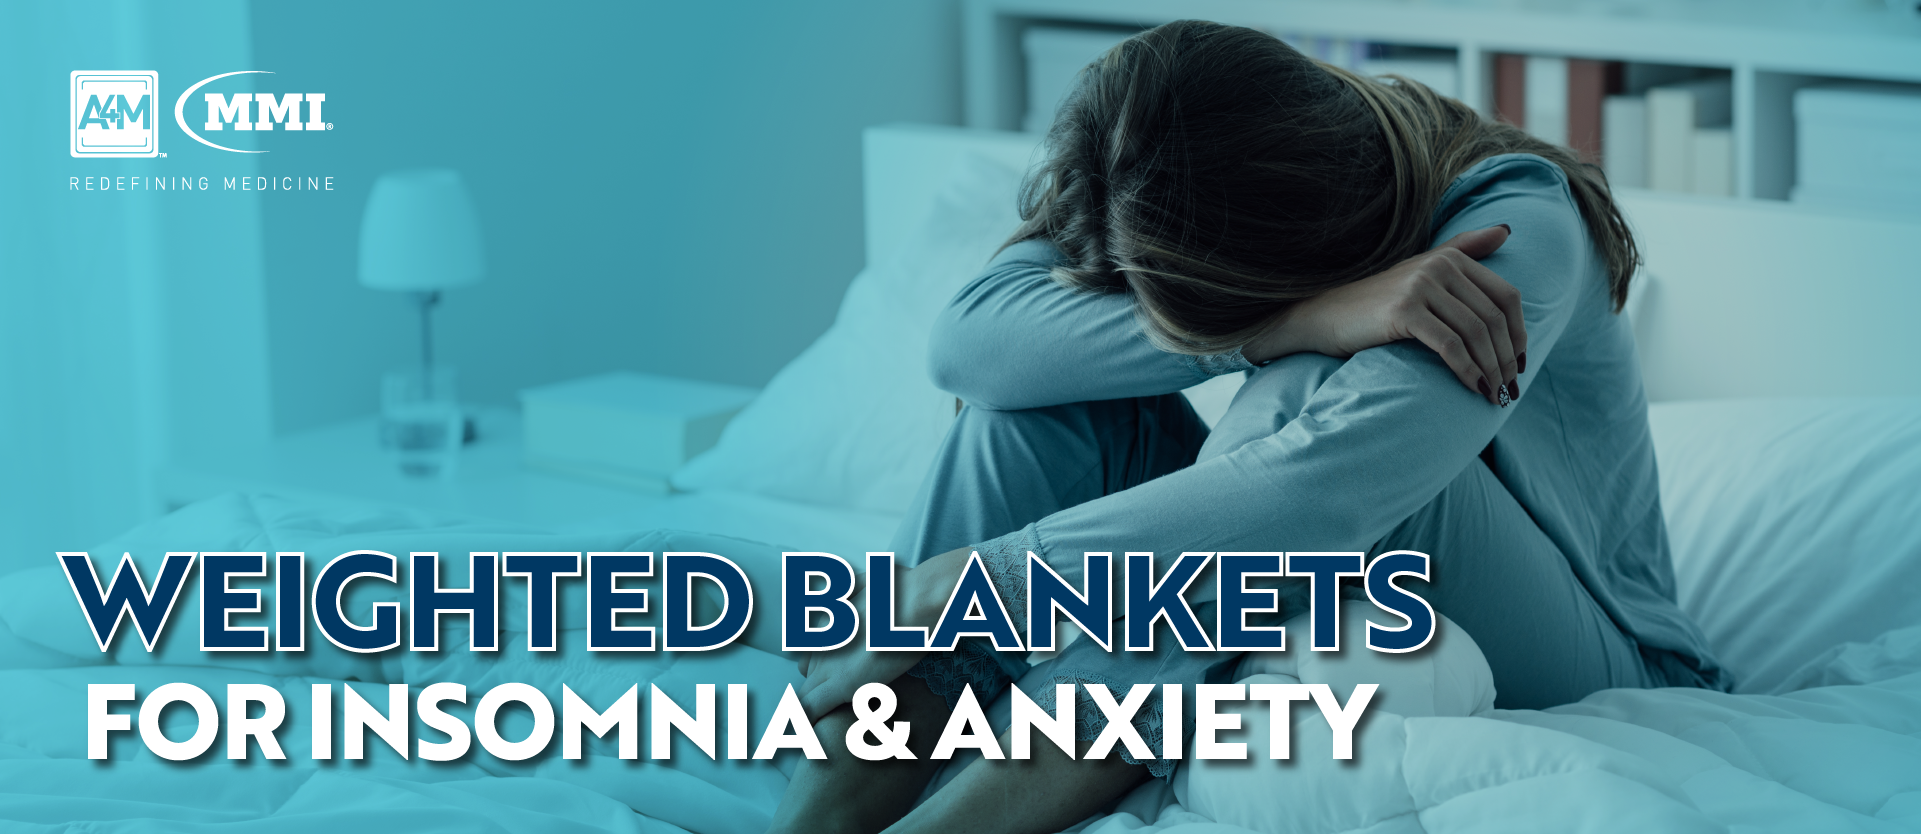 Weighted Blankets for Insomnia and Anxiety • A4M Blog